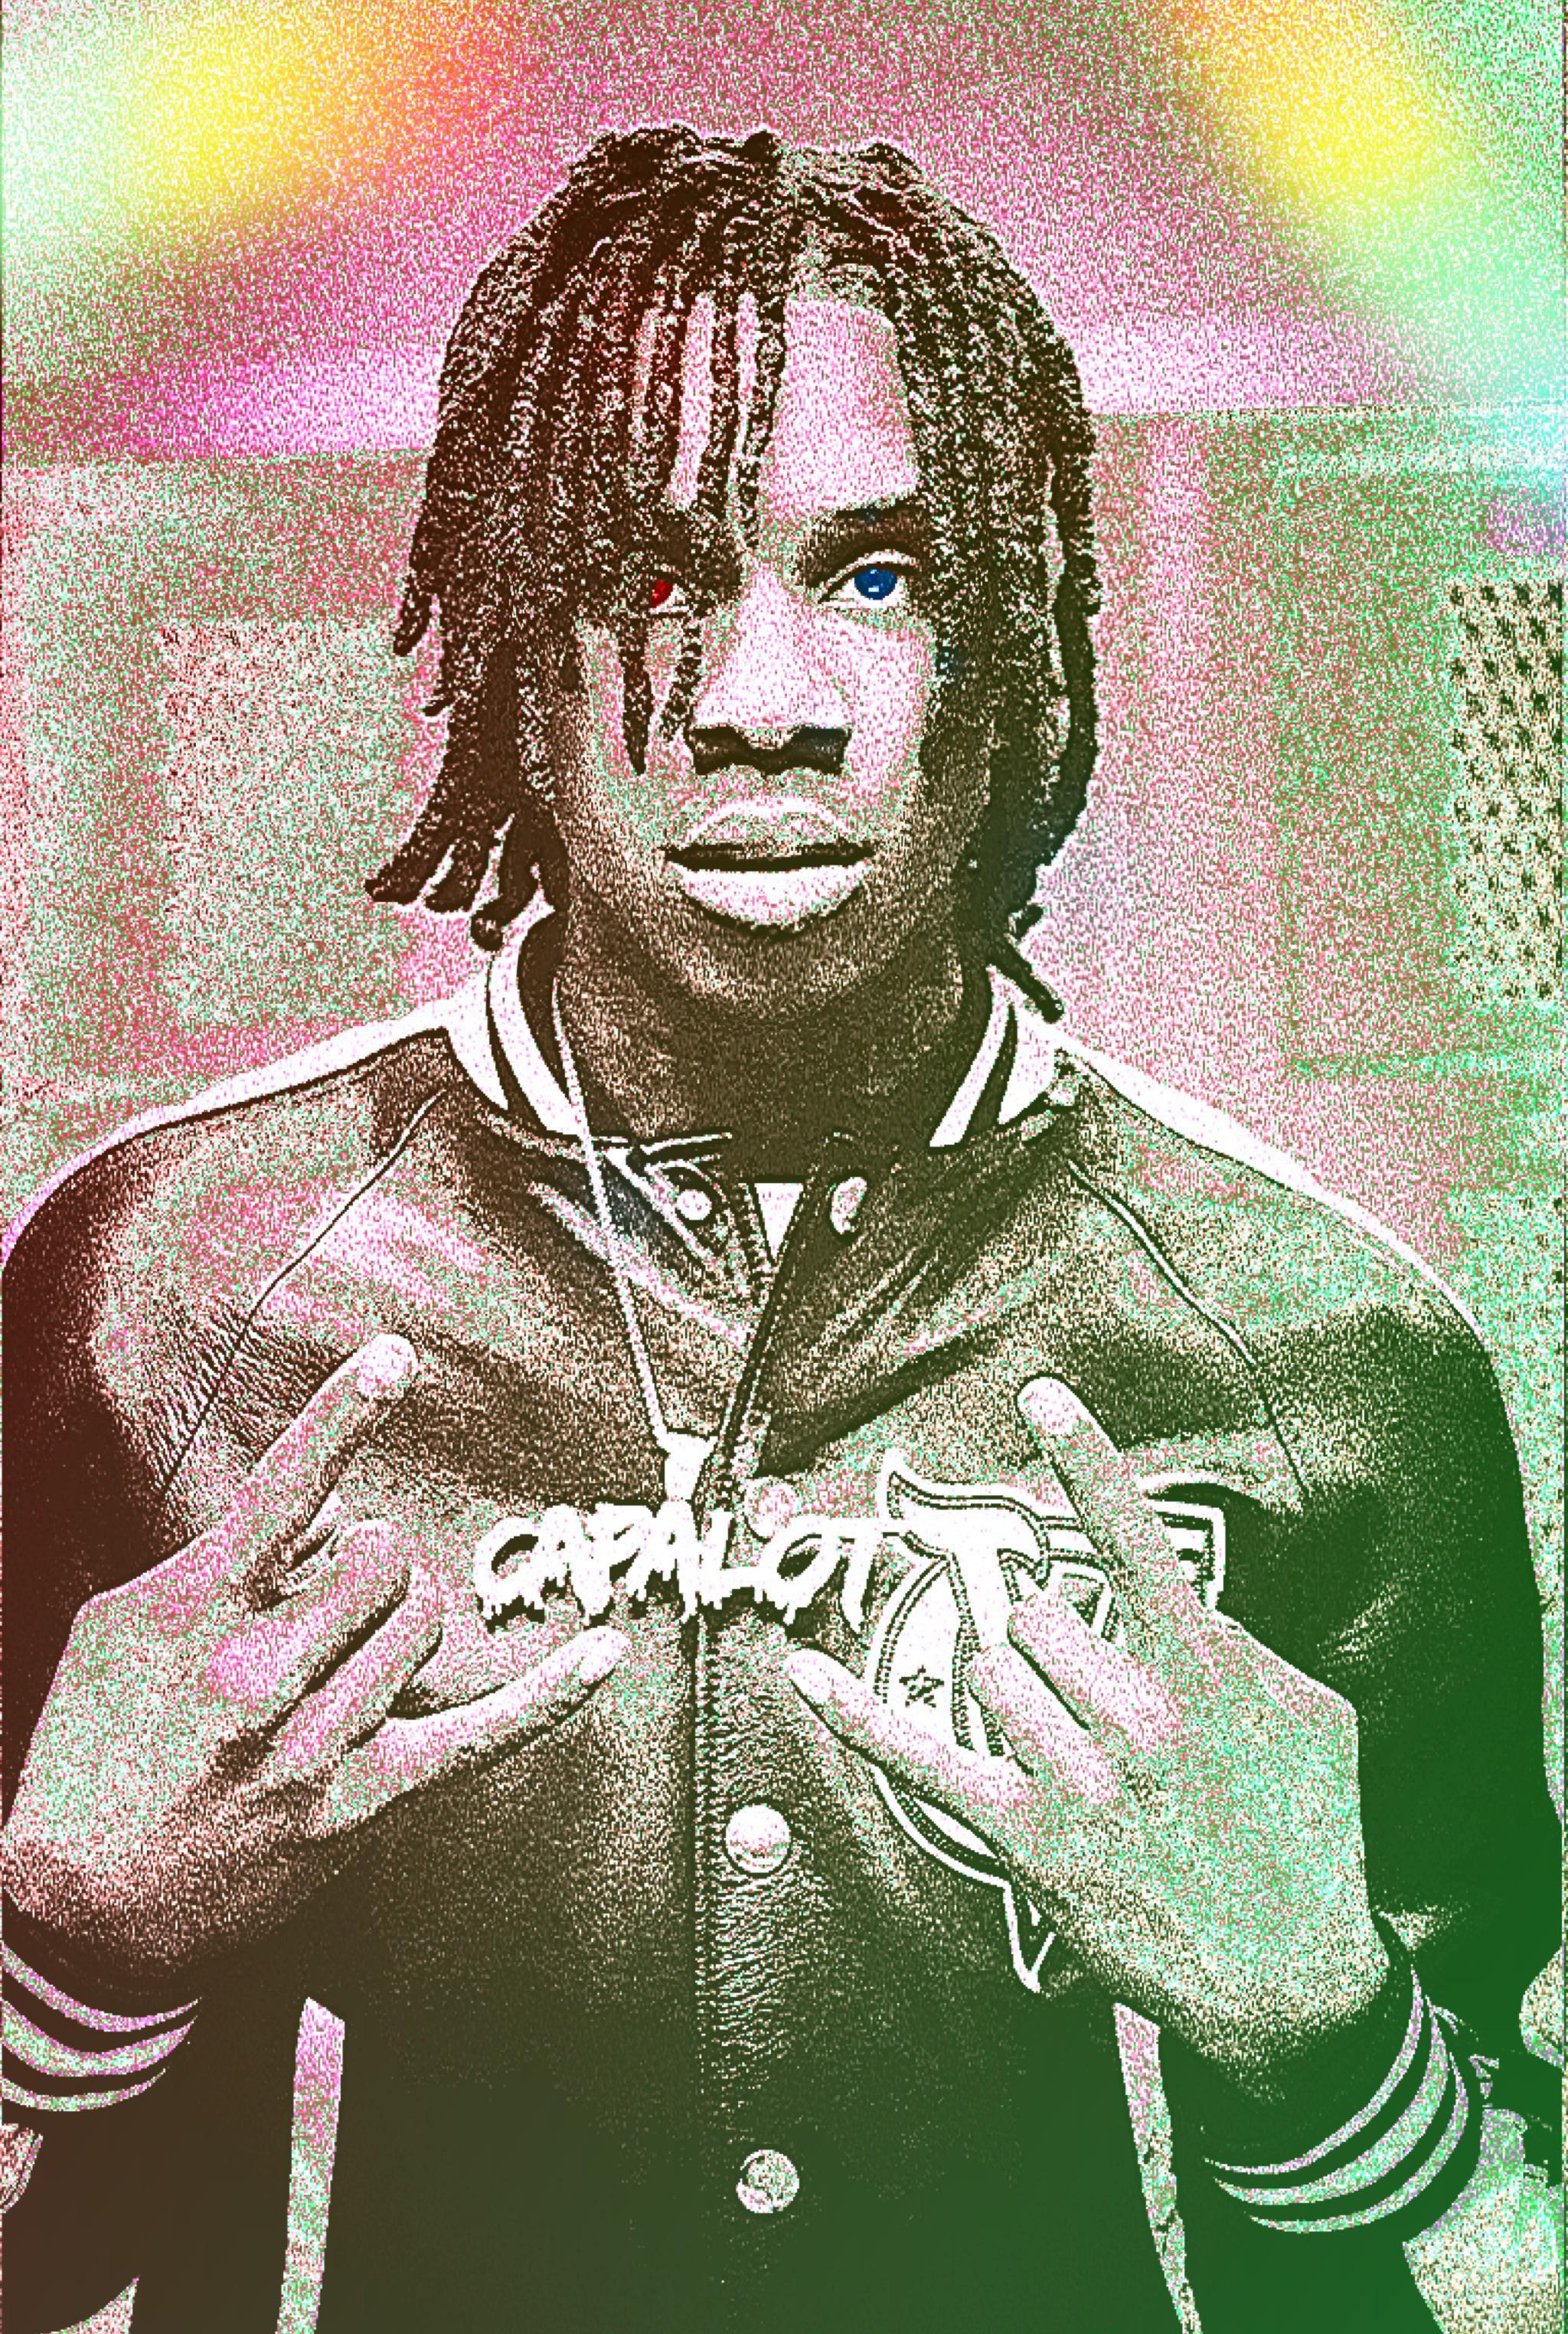 polo g wallpaper i made. lmk what you think